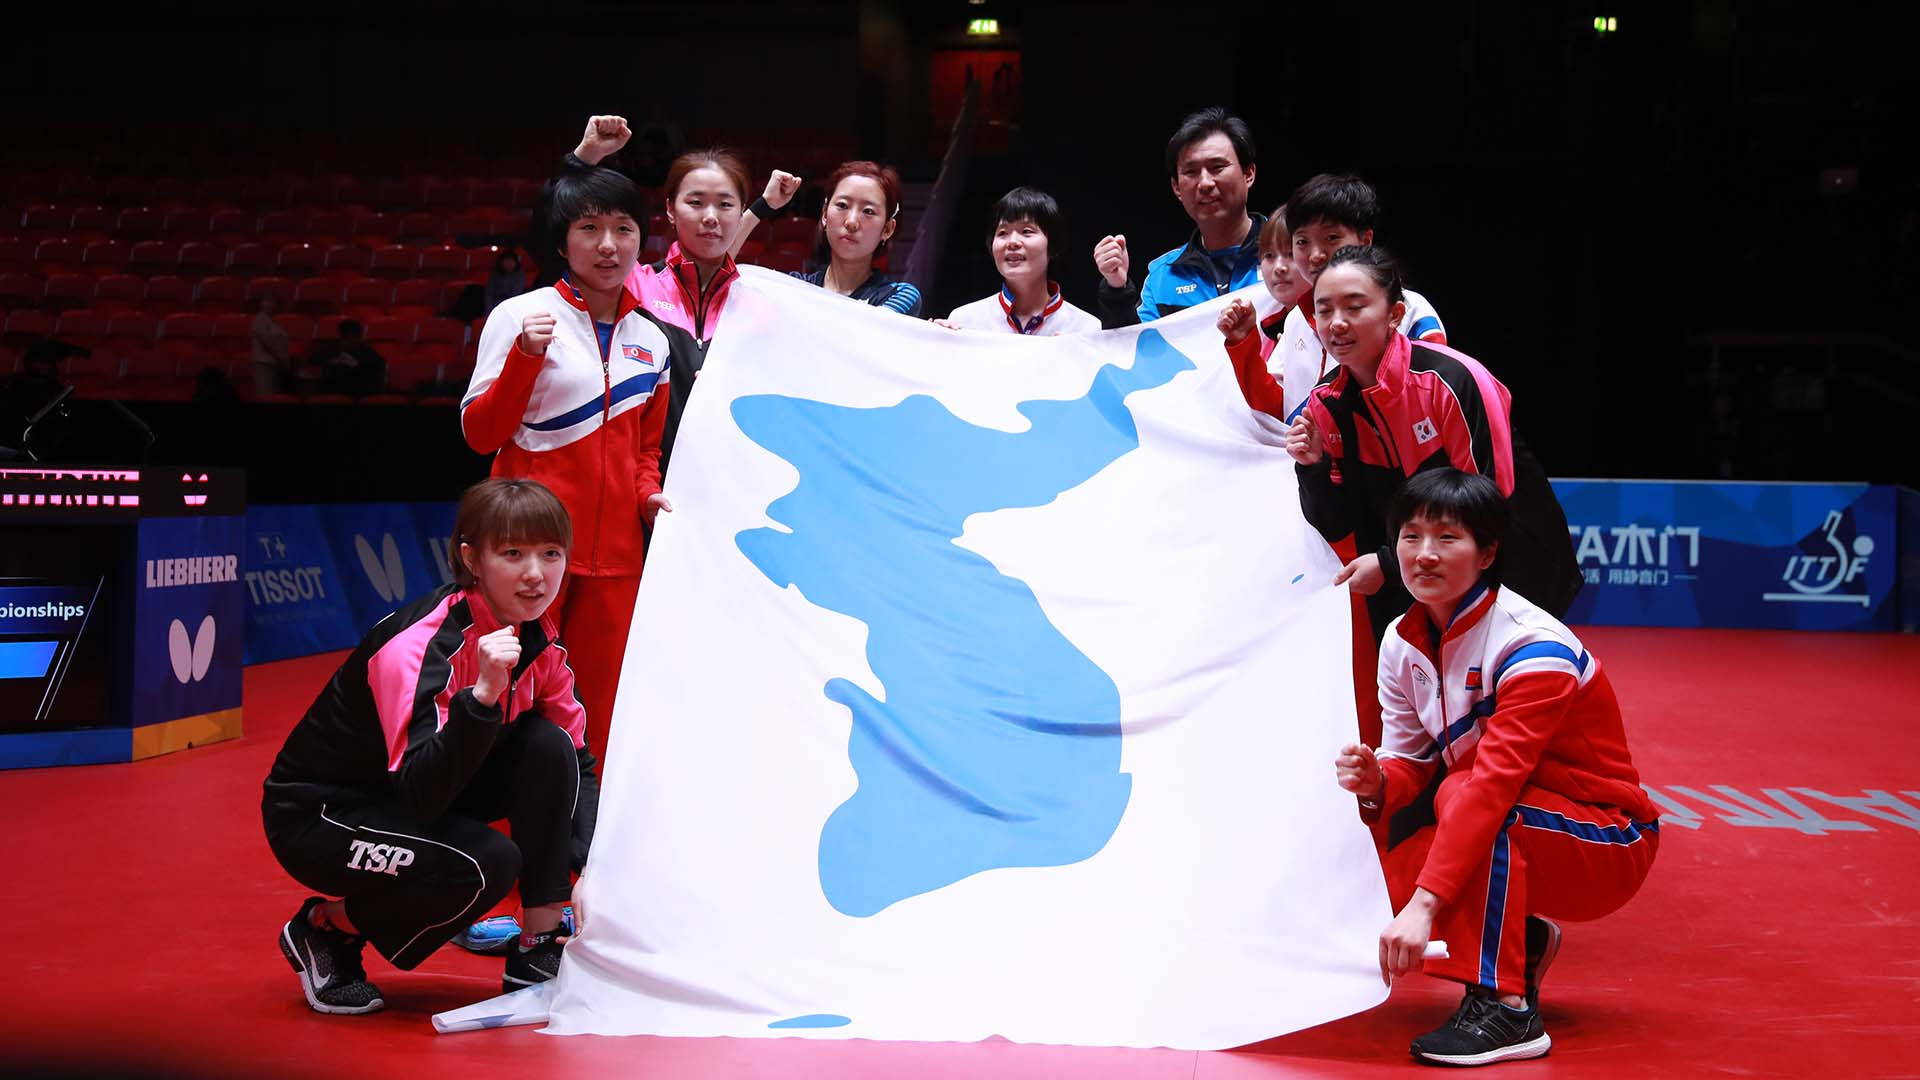 The ITTF Shinhan Korea Open will start tomorrow with the two Korea's once again set to compete together ©Remy Gros